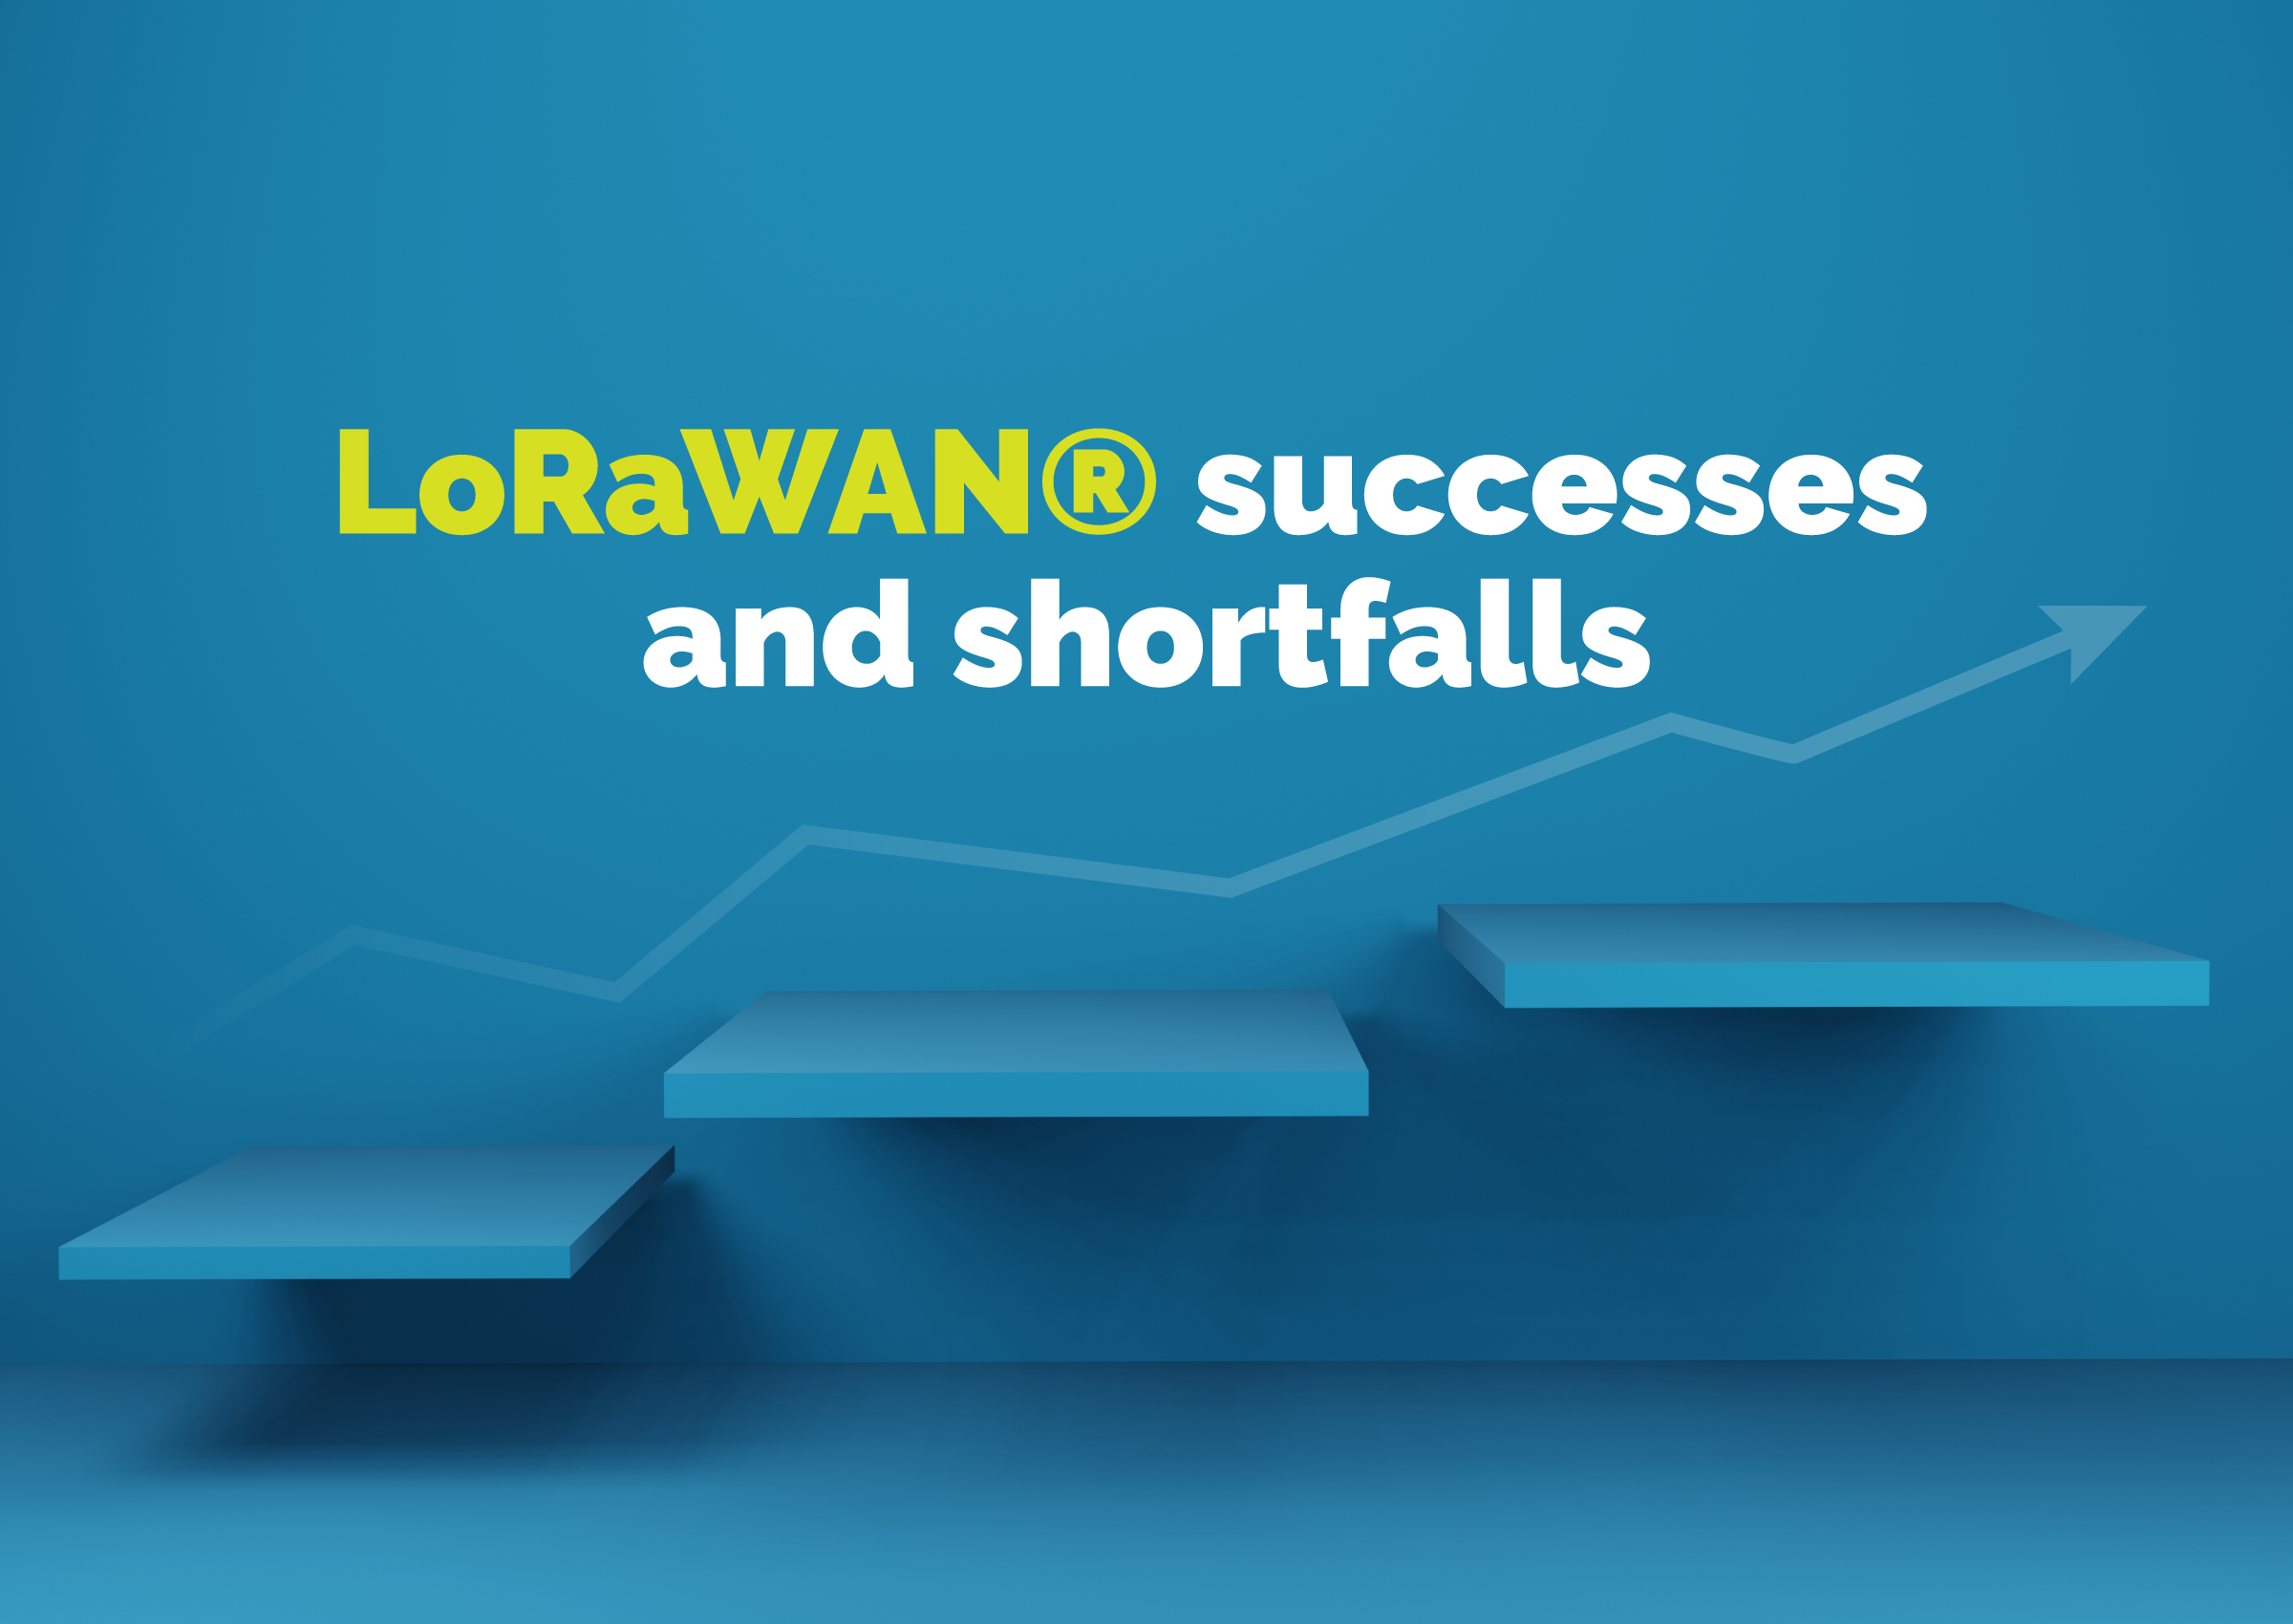 LoRaWAN® successes and shortfalls: Four years and 200 customers’ review